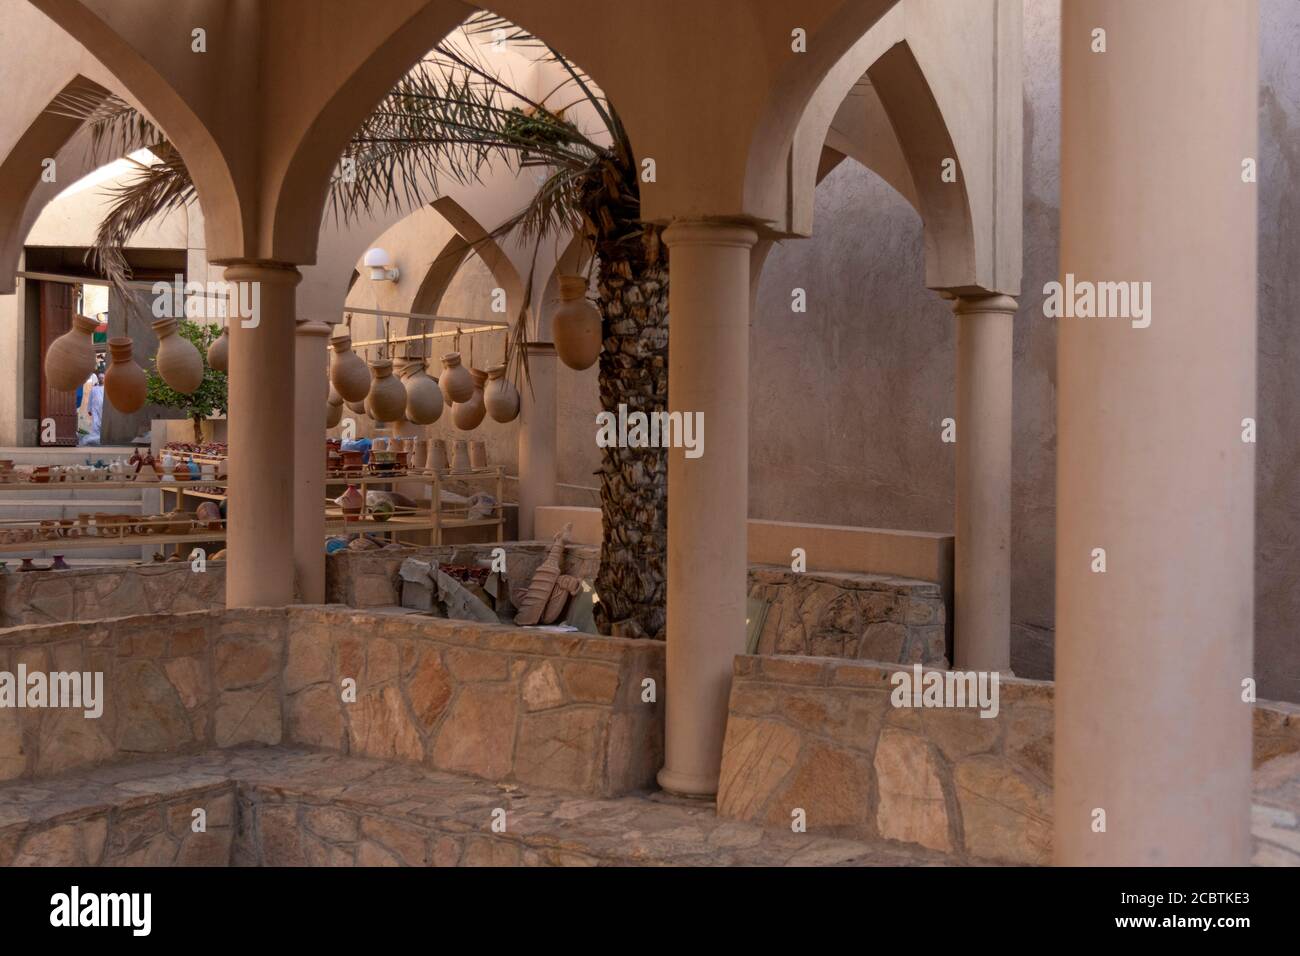 The Handicraft market in Nizwa fort ready for customers on a friday Stock Photo